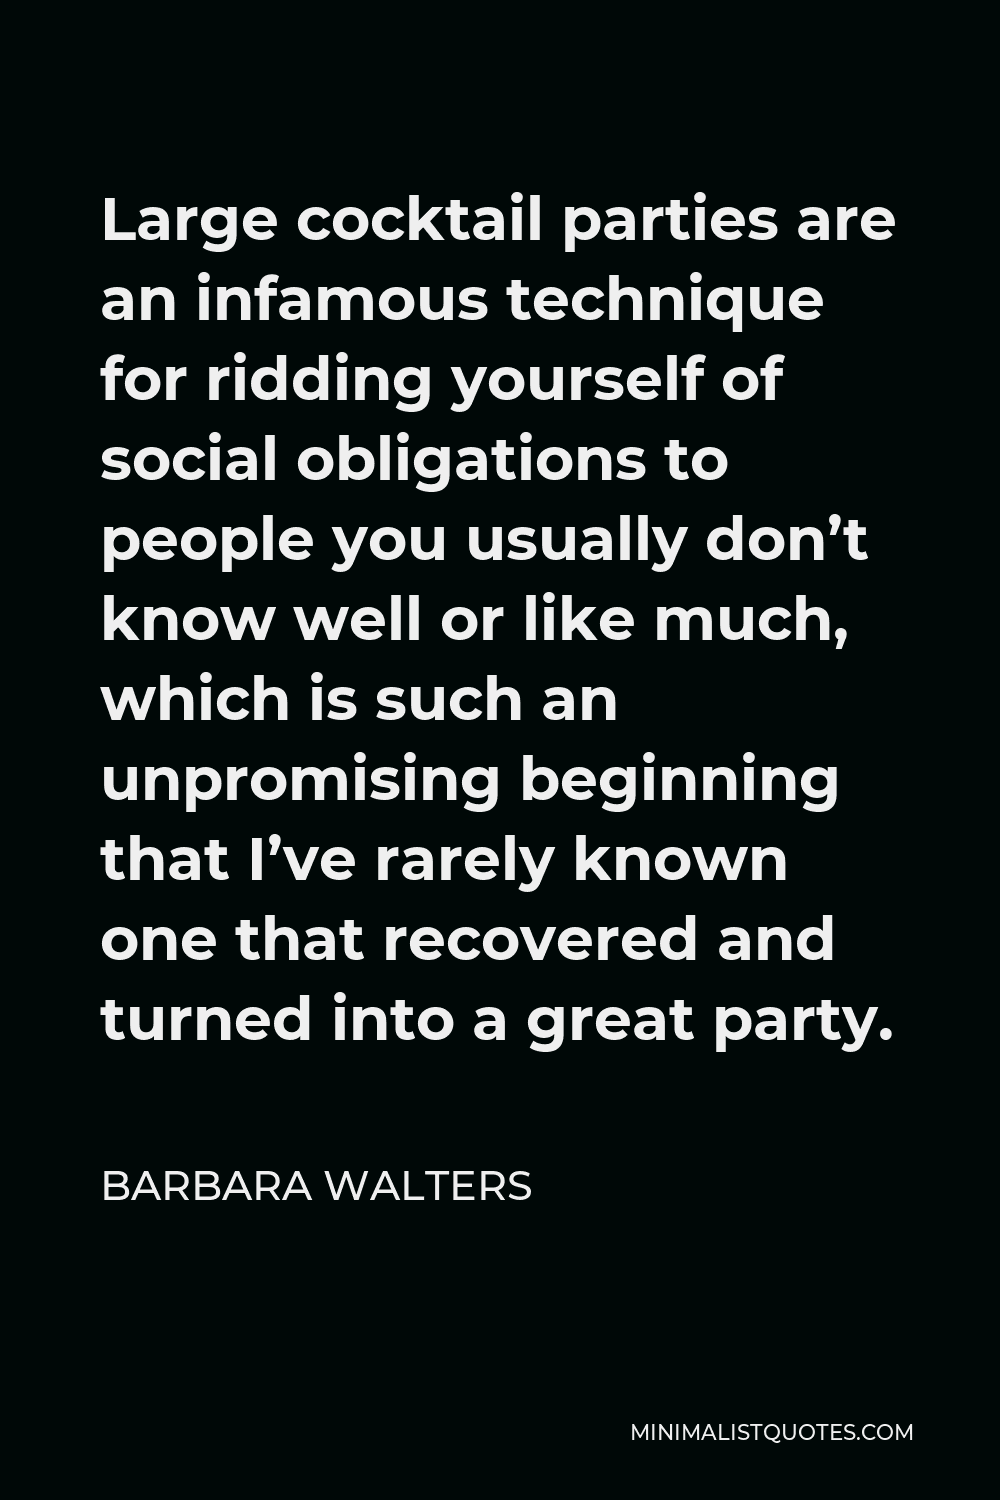 Barbara Walters Quote - Large cocktail parties are an infamous technique for ridding yourself of social obligations to people you usually don’t know well or like much, which is such an unpromising beginning that I’ve rarely known one that recovered and turned into a great party.